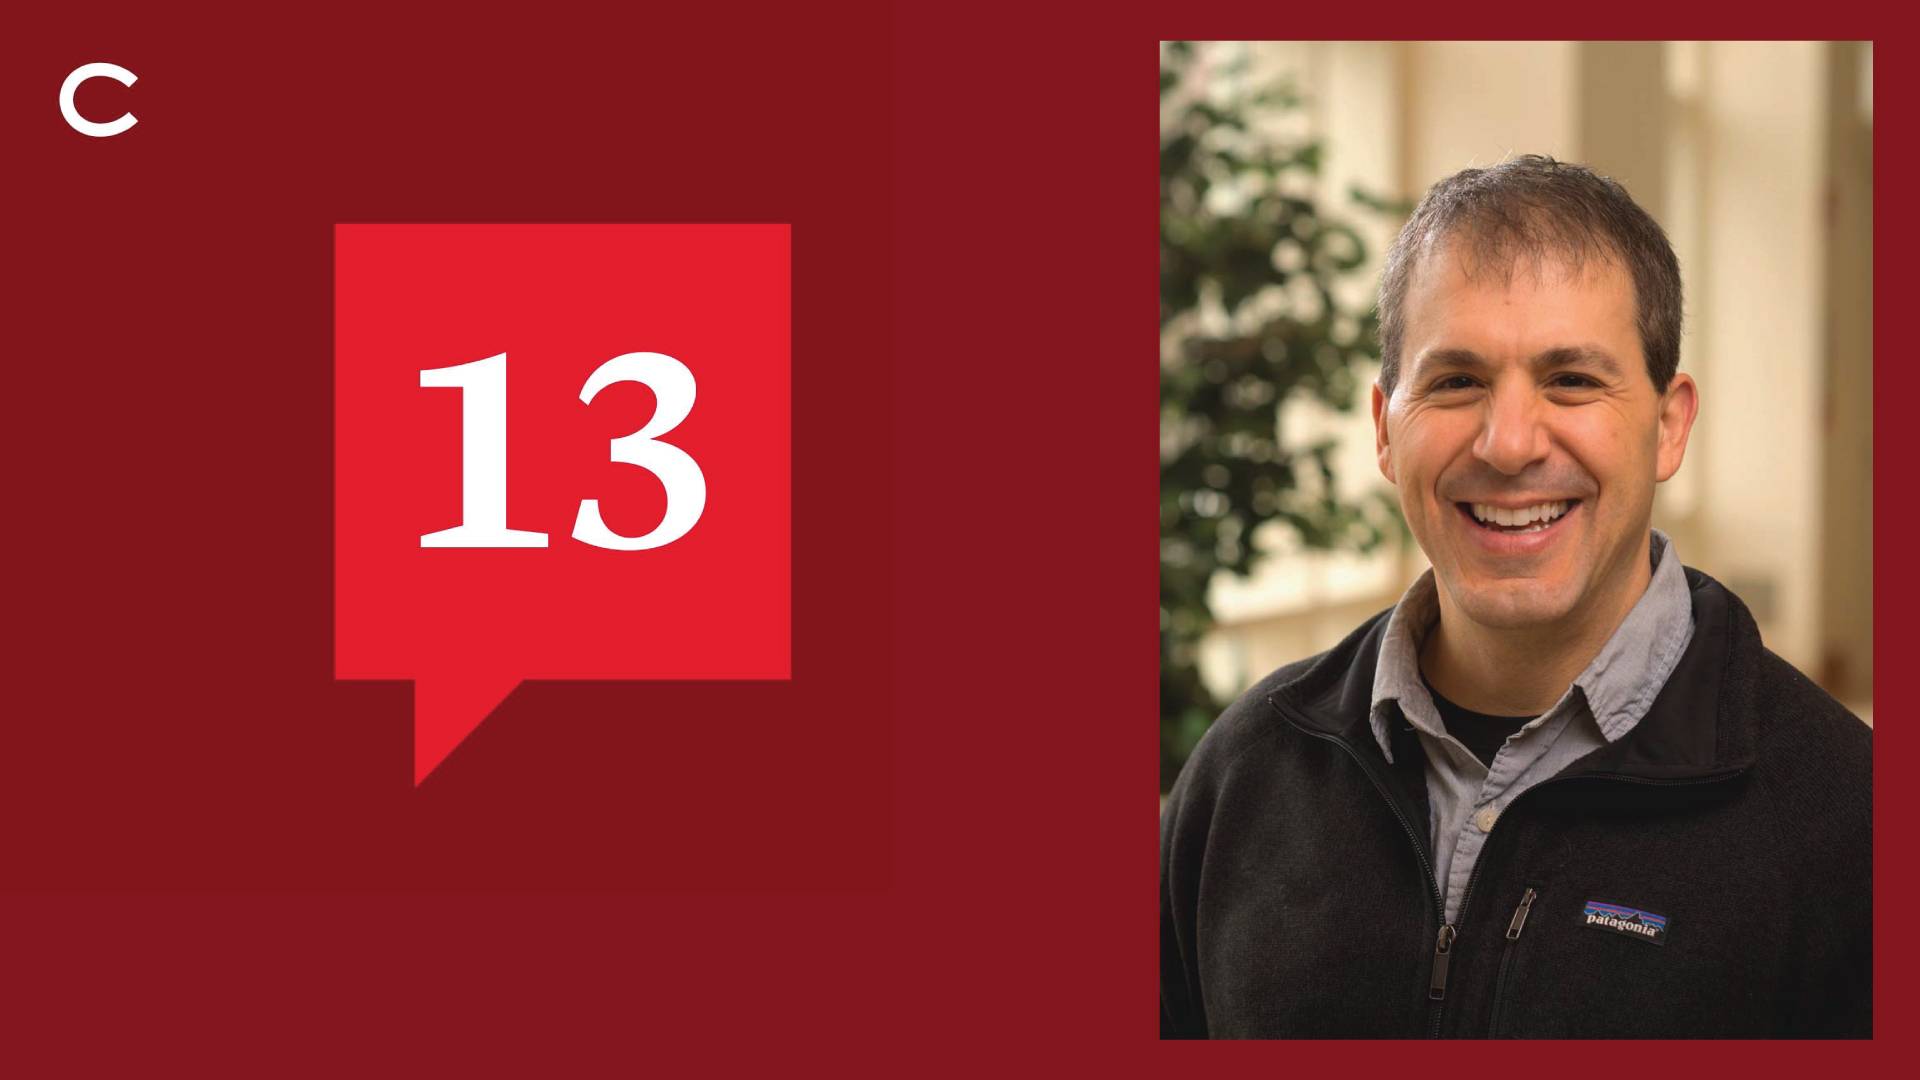 Colgate Director of Sustainability John Pumilio is the latest community member to be featured on Colgate's newest podcast, 13.